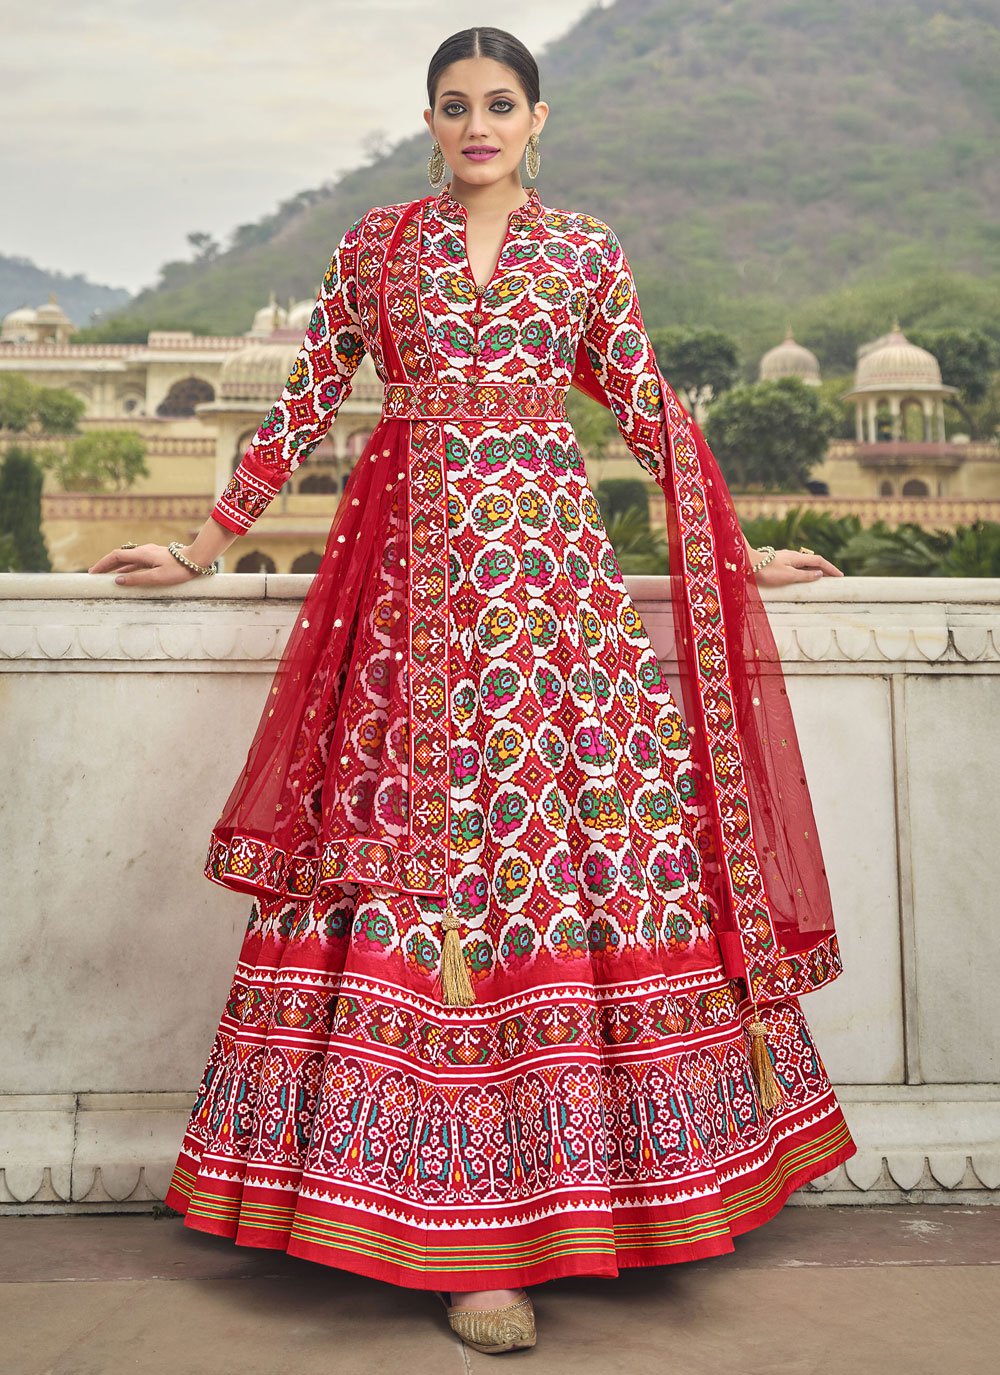 15 Stylish Designs of Red Frocks for Stunning Look